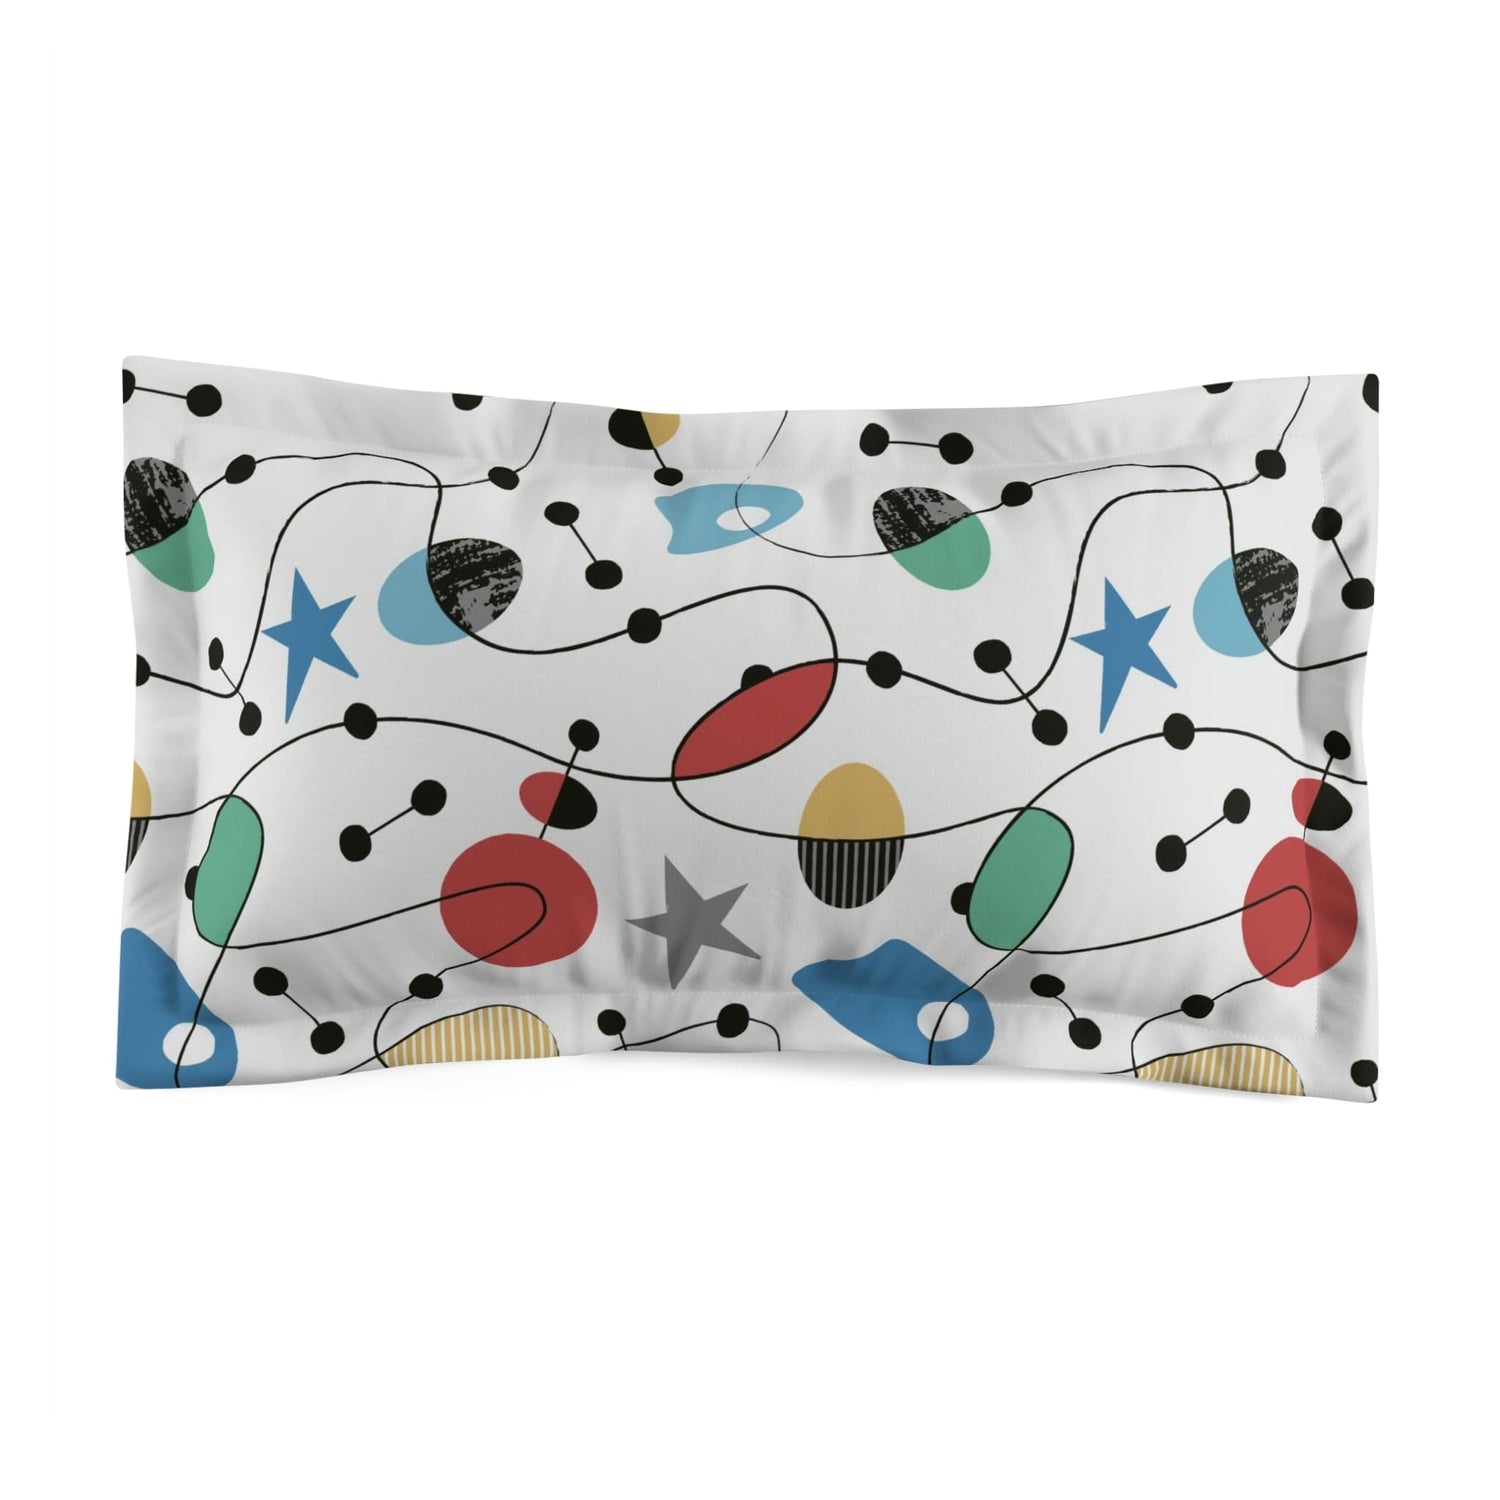 Atomic Space, Mid Century Modern, White, Abstract Mid Modernist Pillow Sham Home Decor King